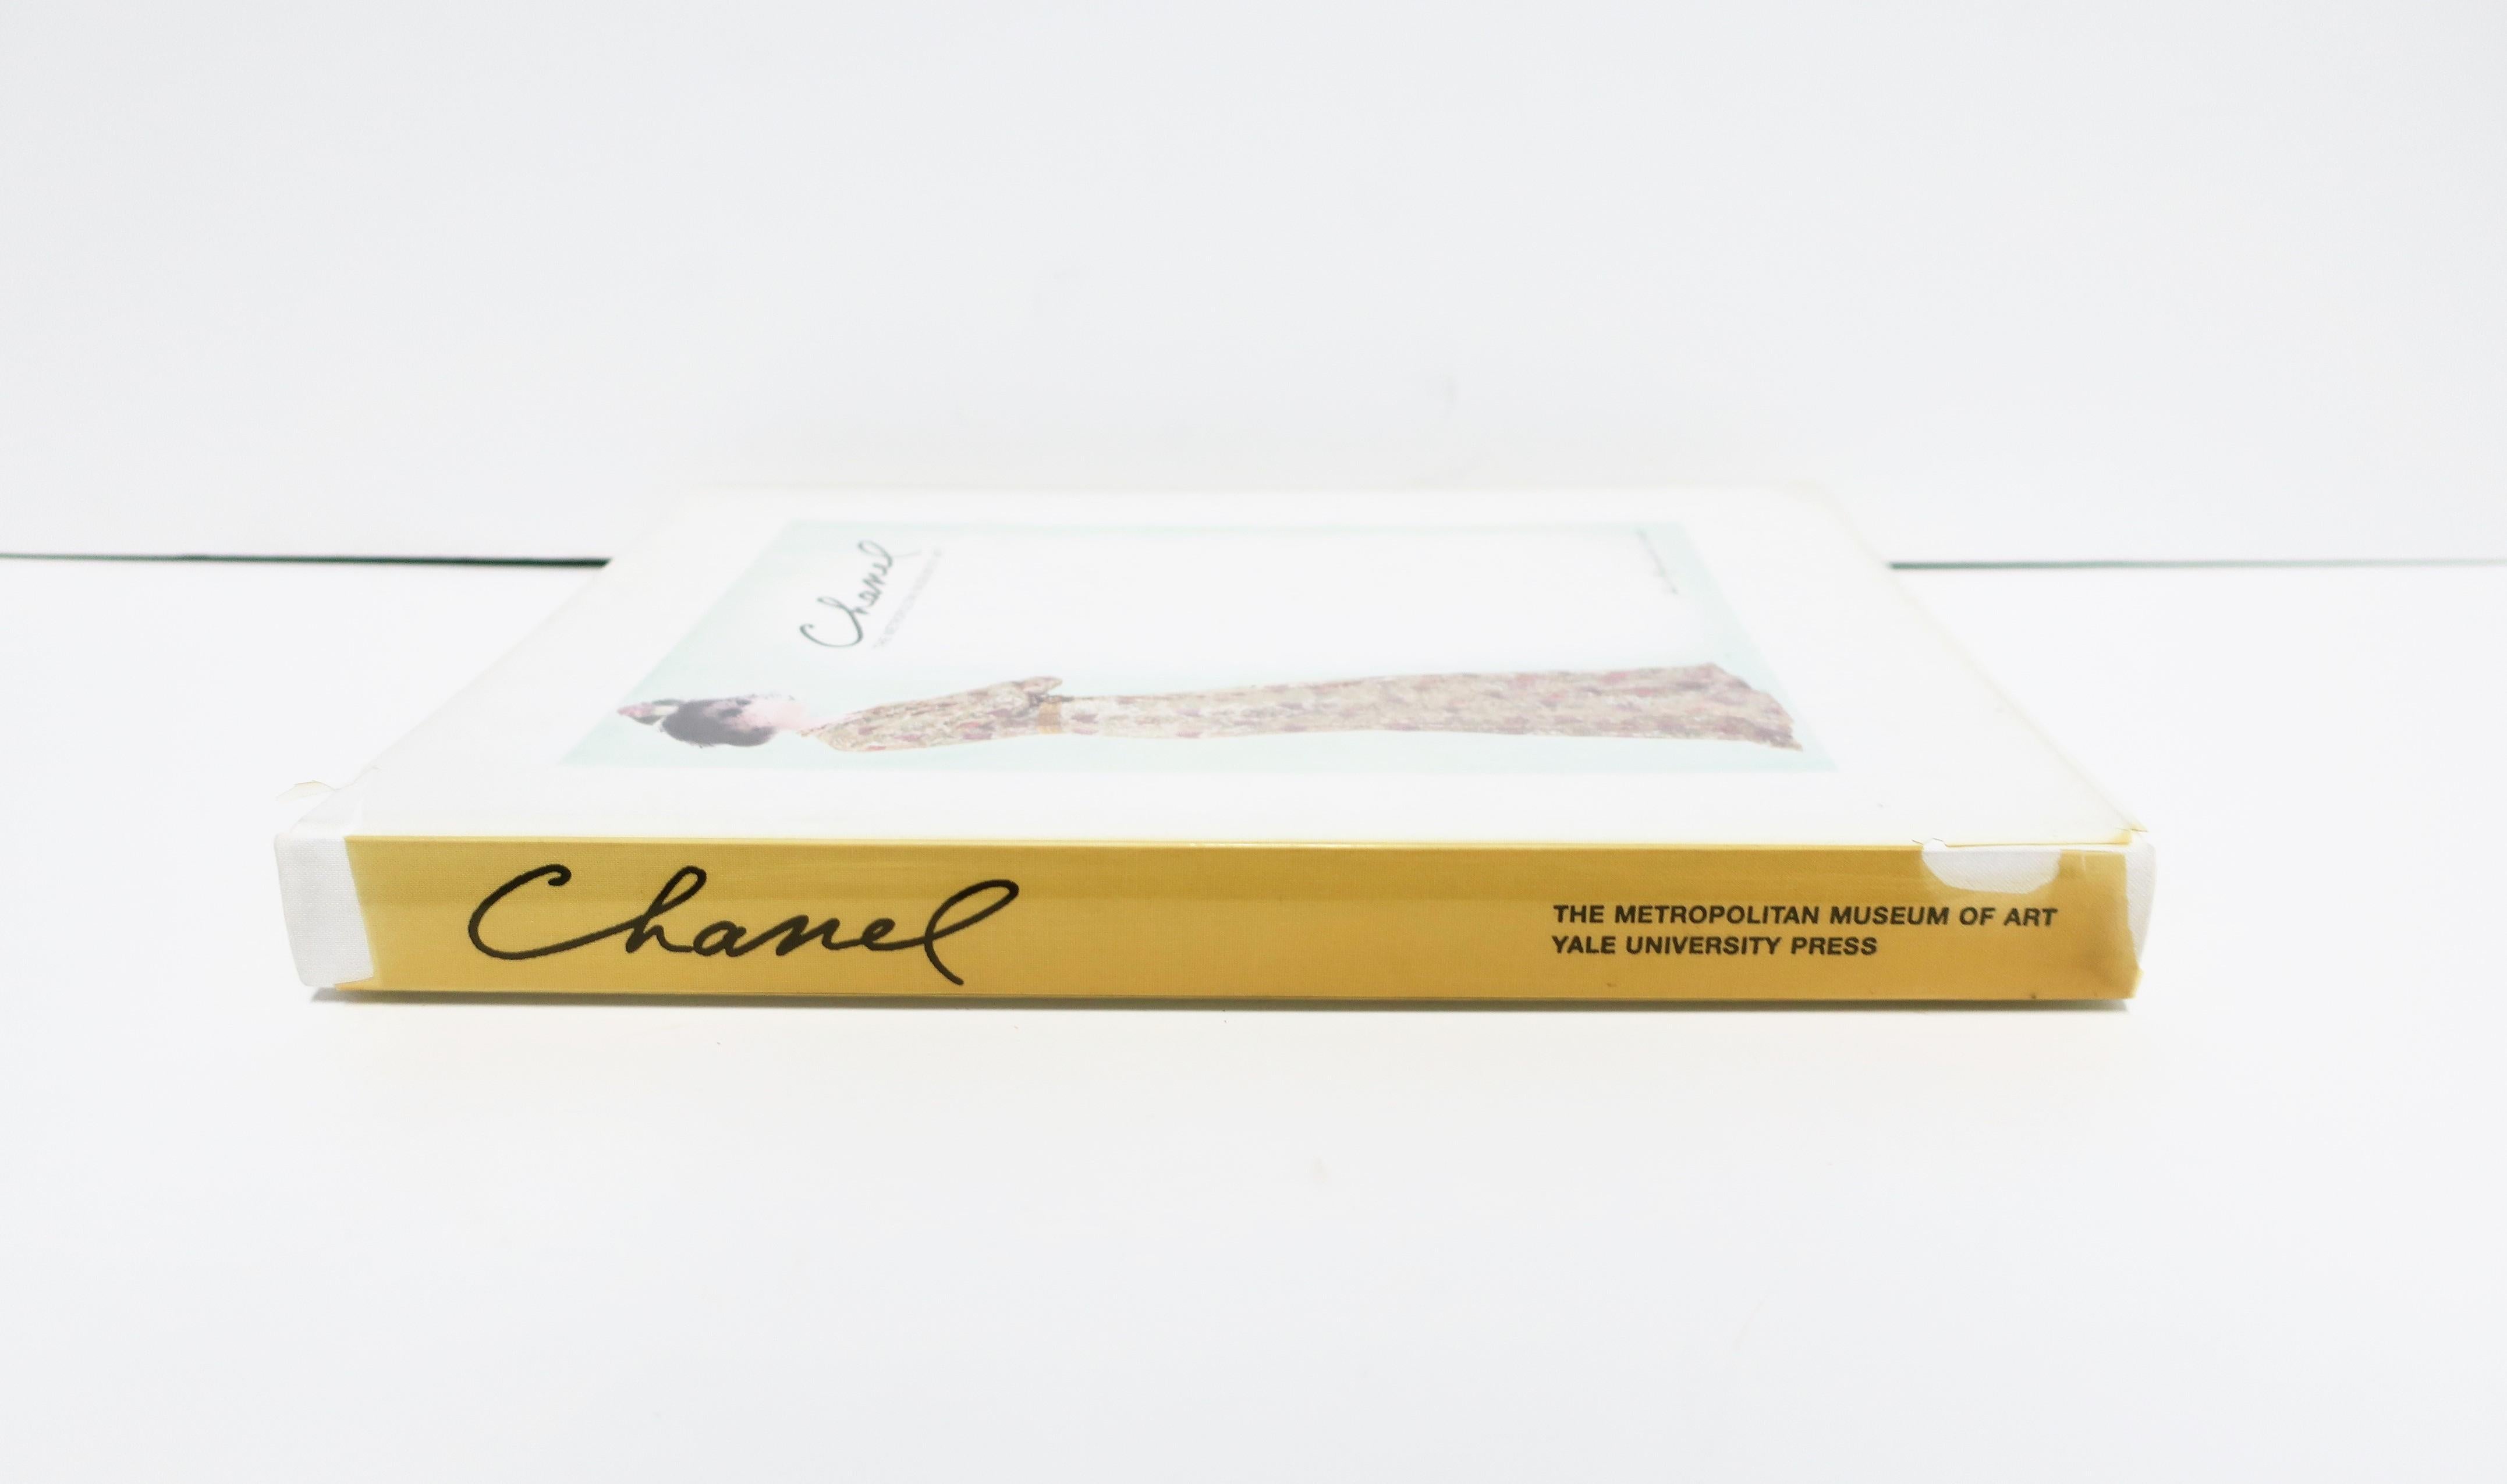 Chanel The Metropolitan Museum of Art Coffee Table or Library Book 9